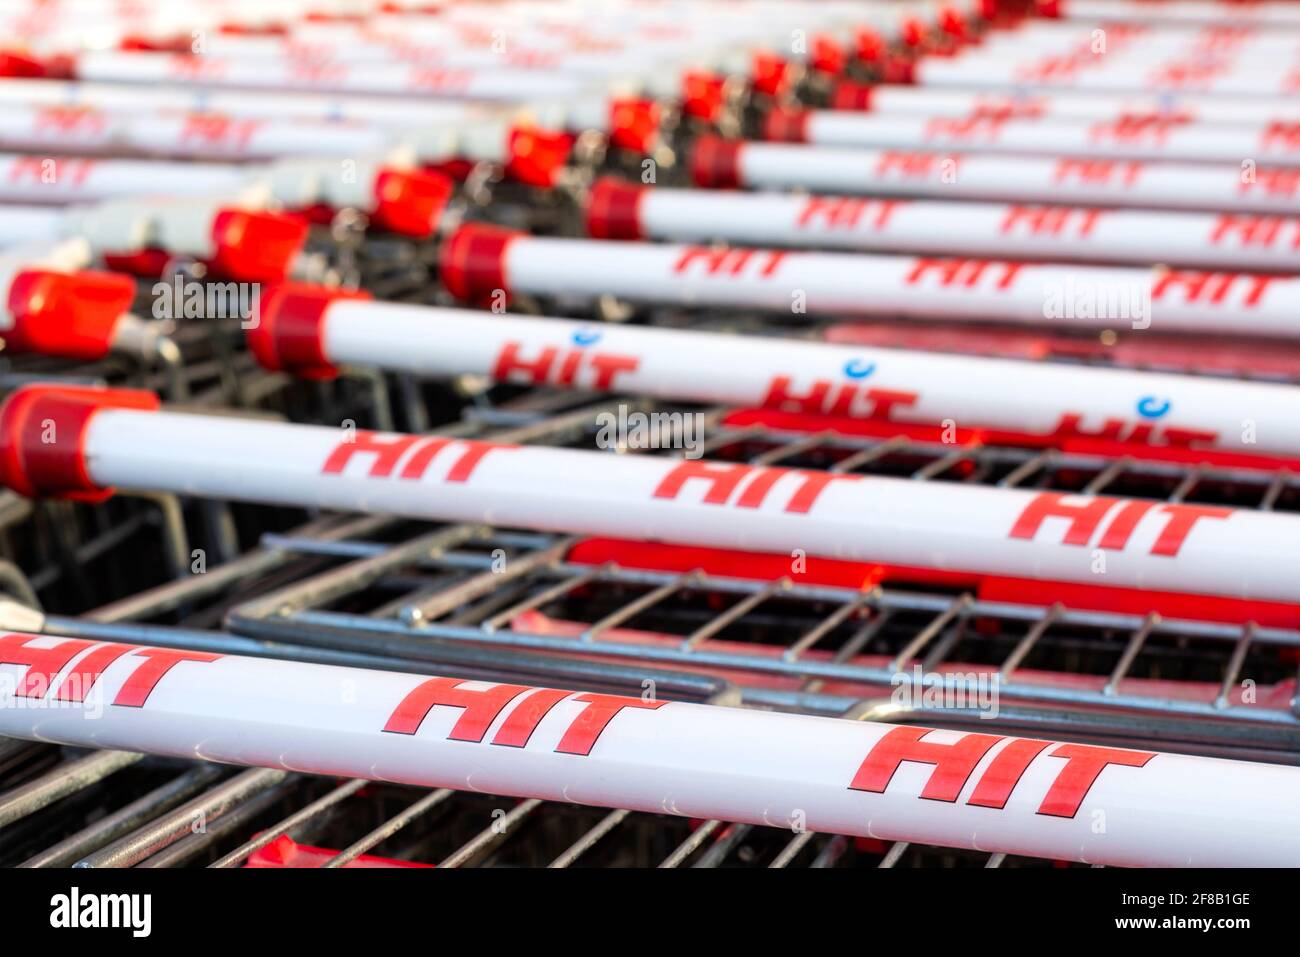 Hit supermarket red and white branded shopping trolleys or shopping carts stacked. Stock Photo